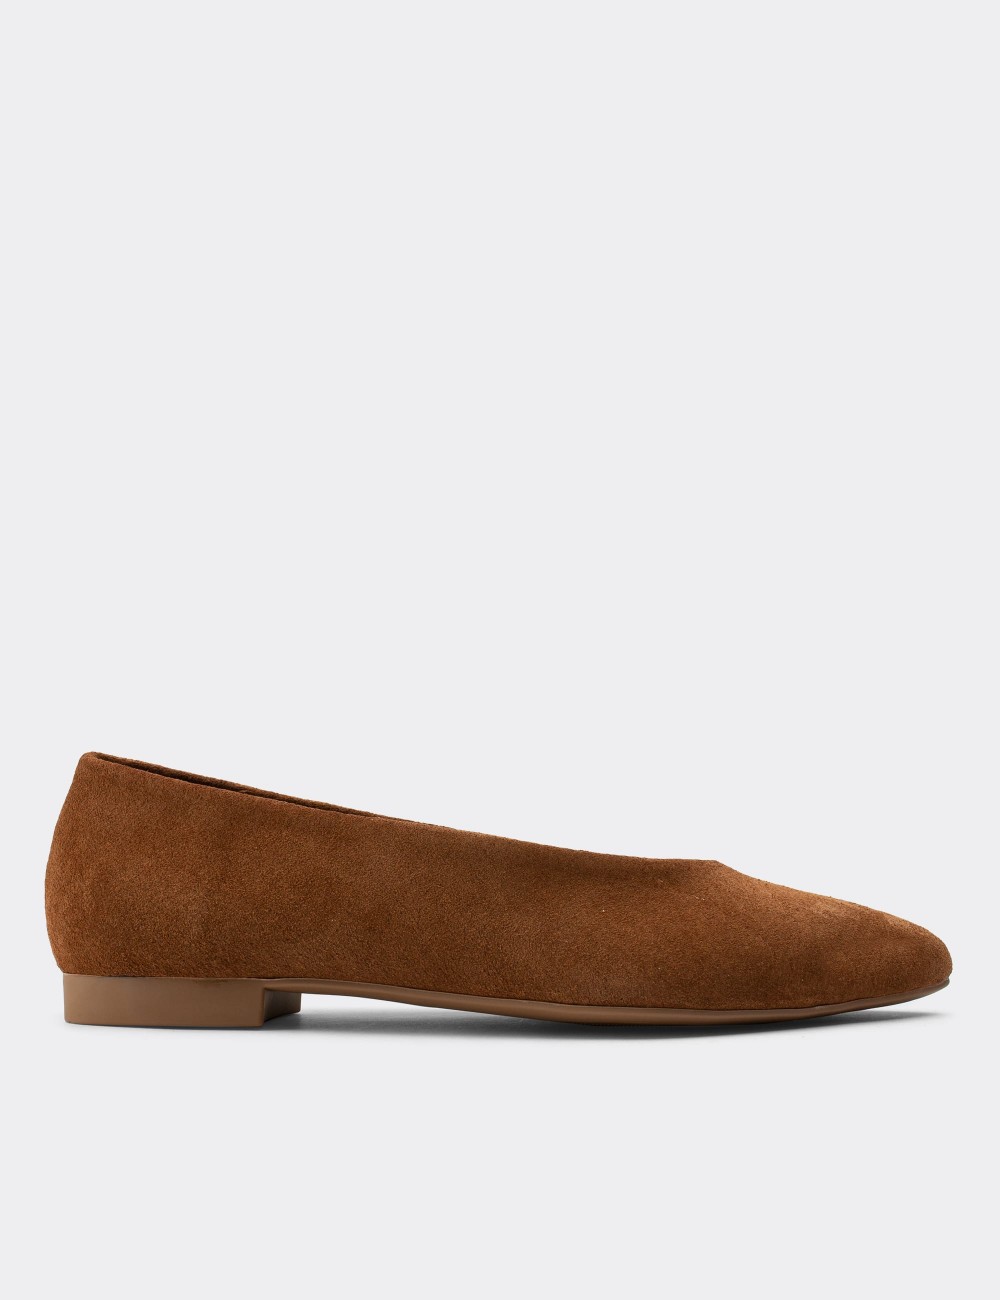 Tan Suede Leather Loafers - 01896ZTBAC01